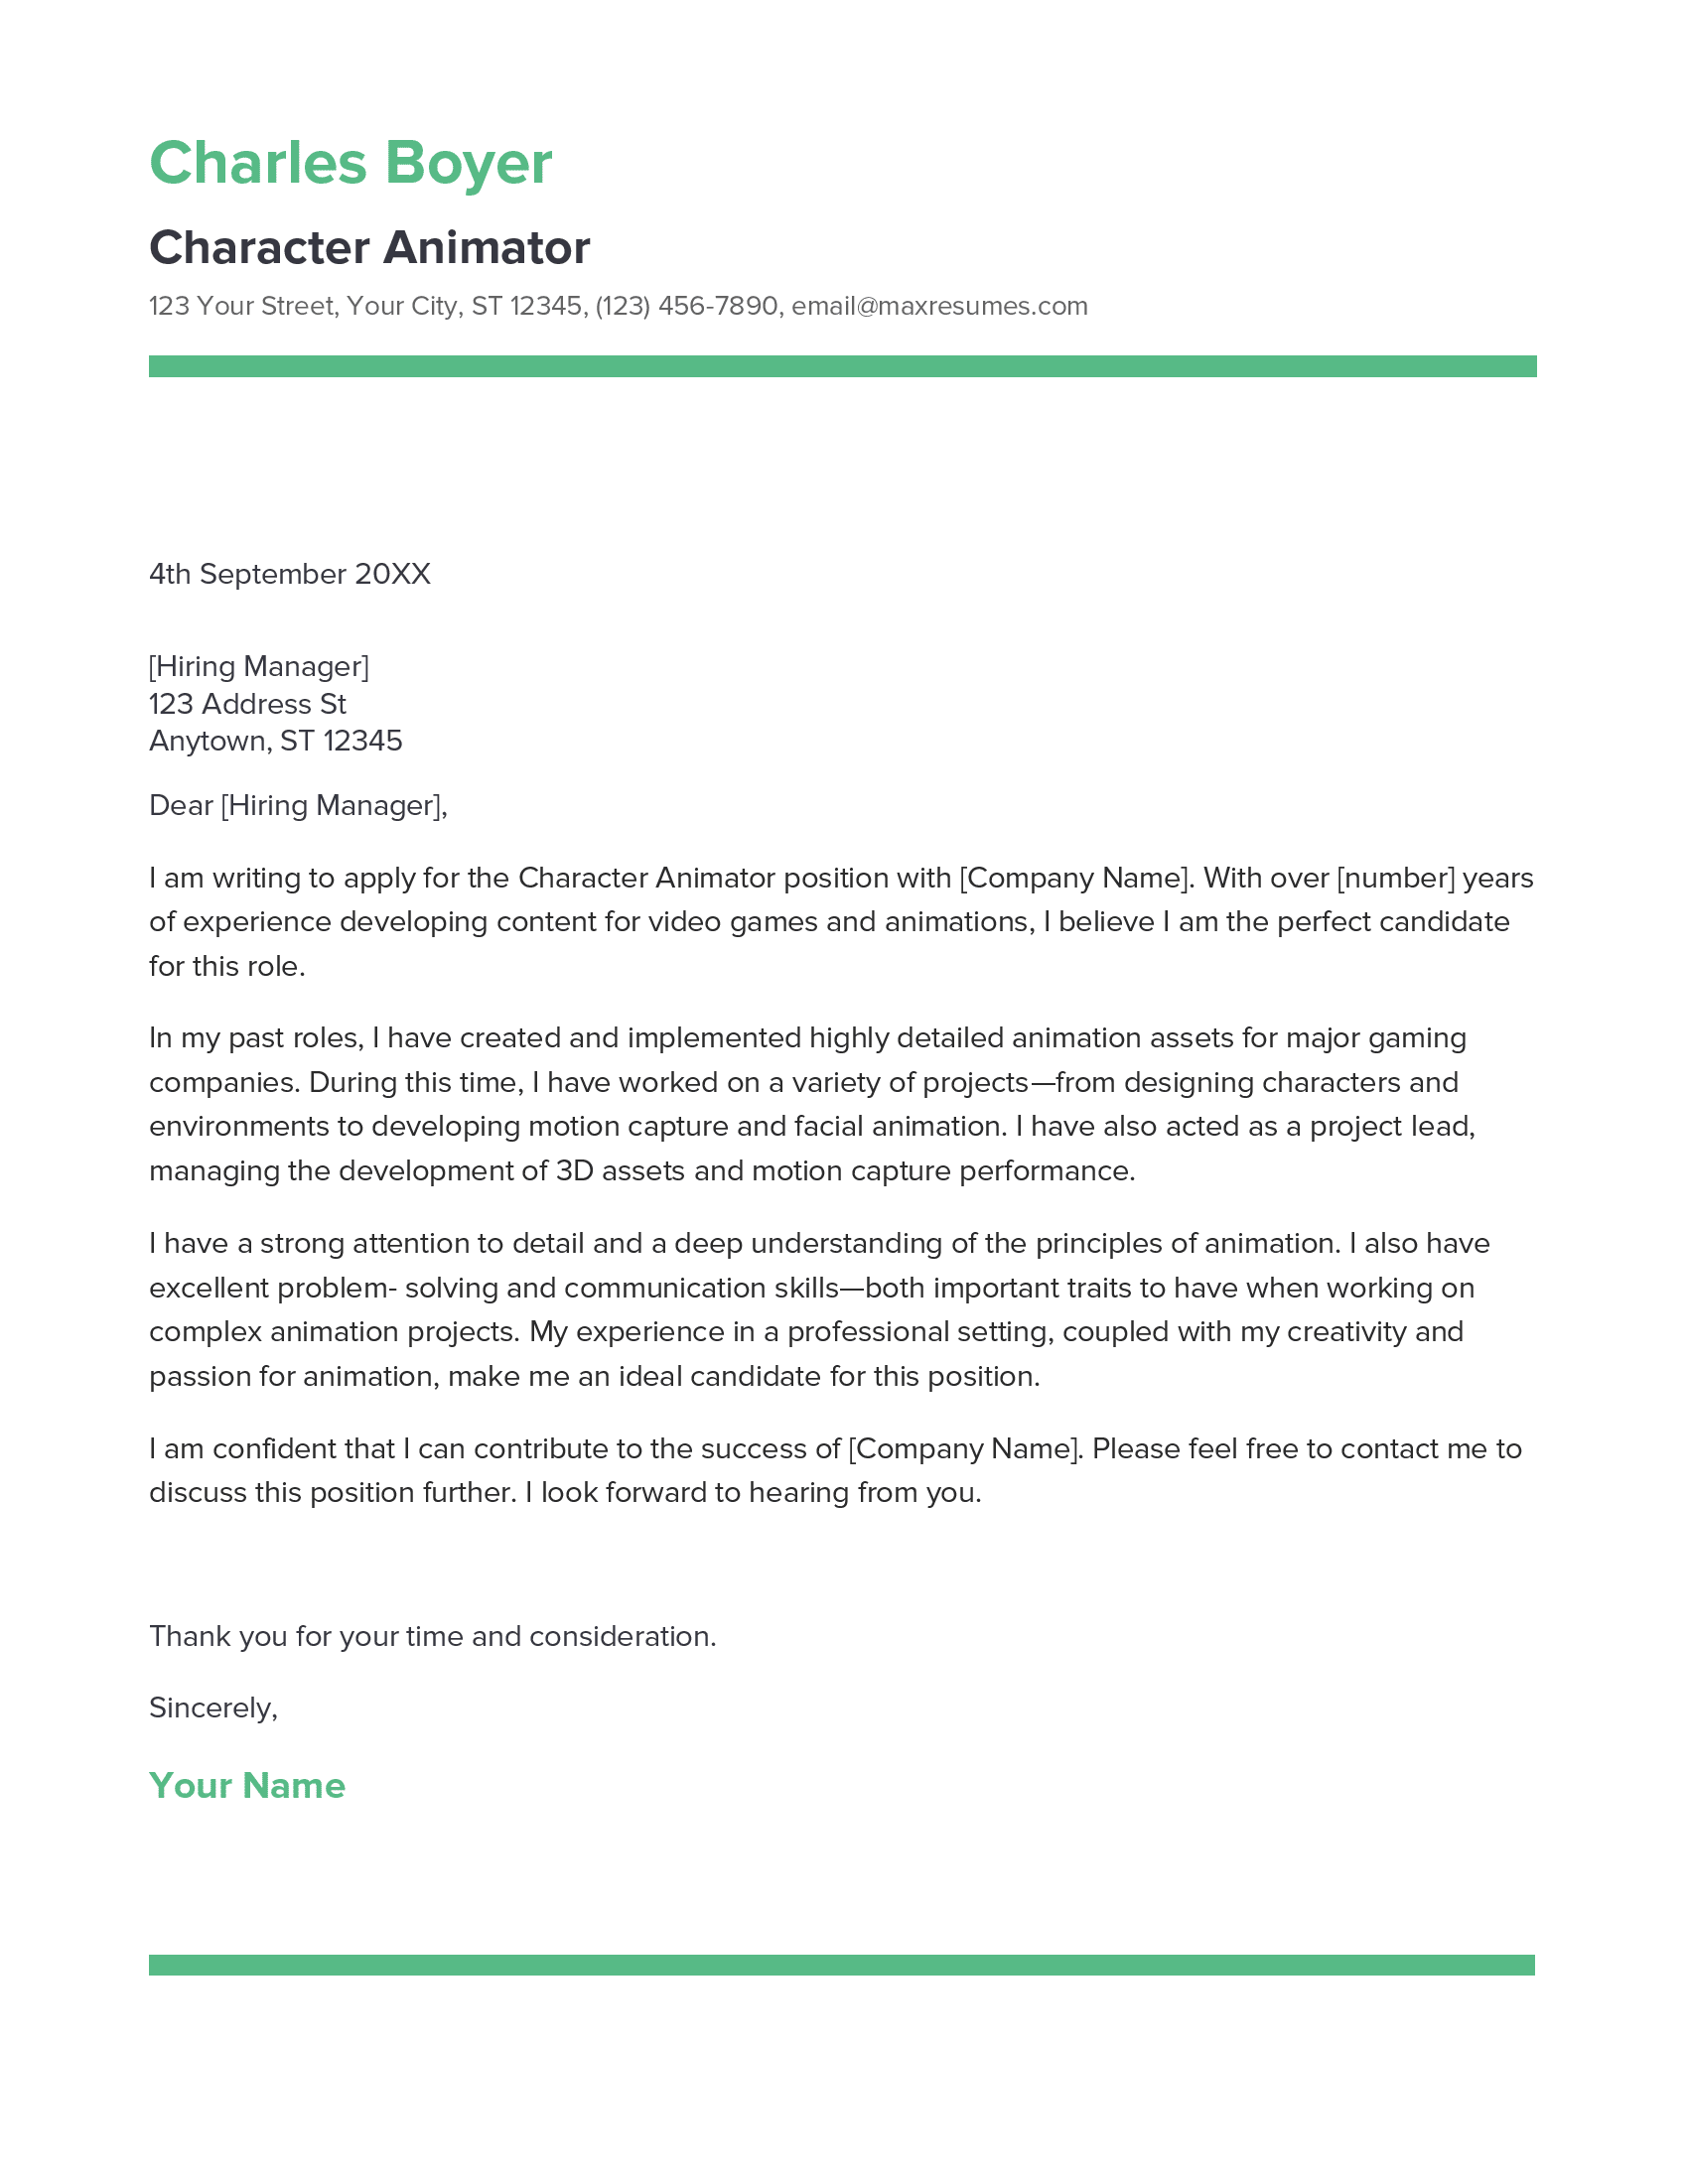 Character Animator Cover Letter Example